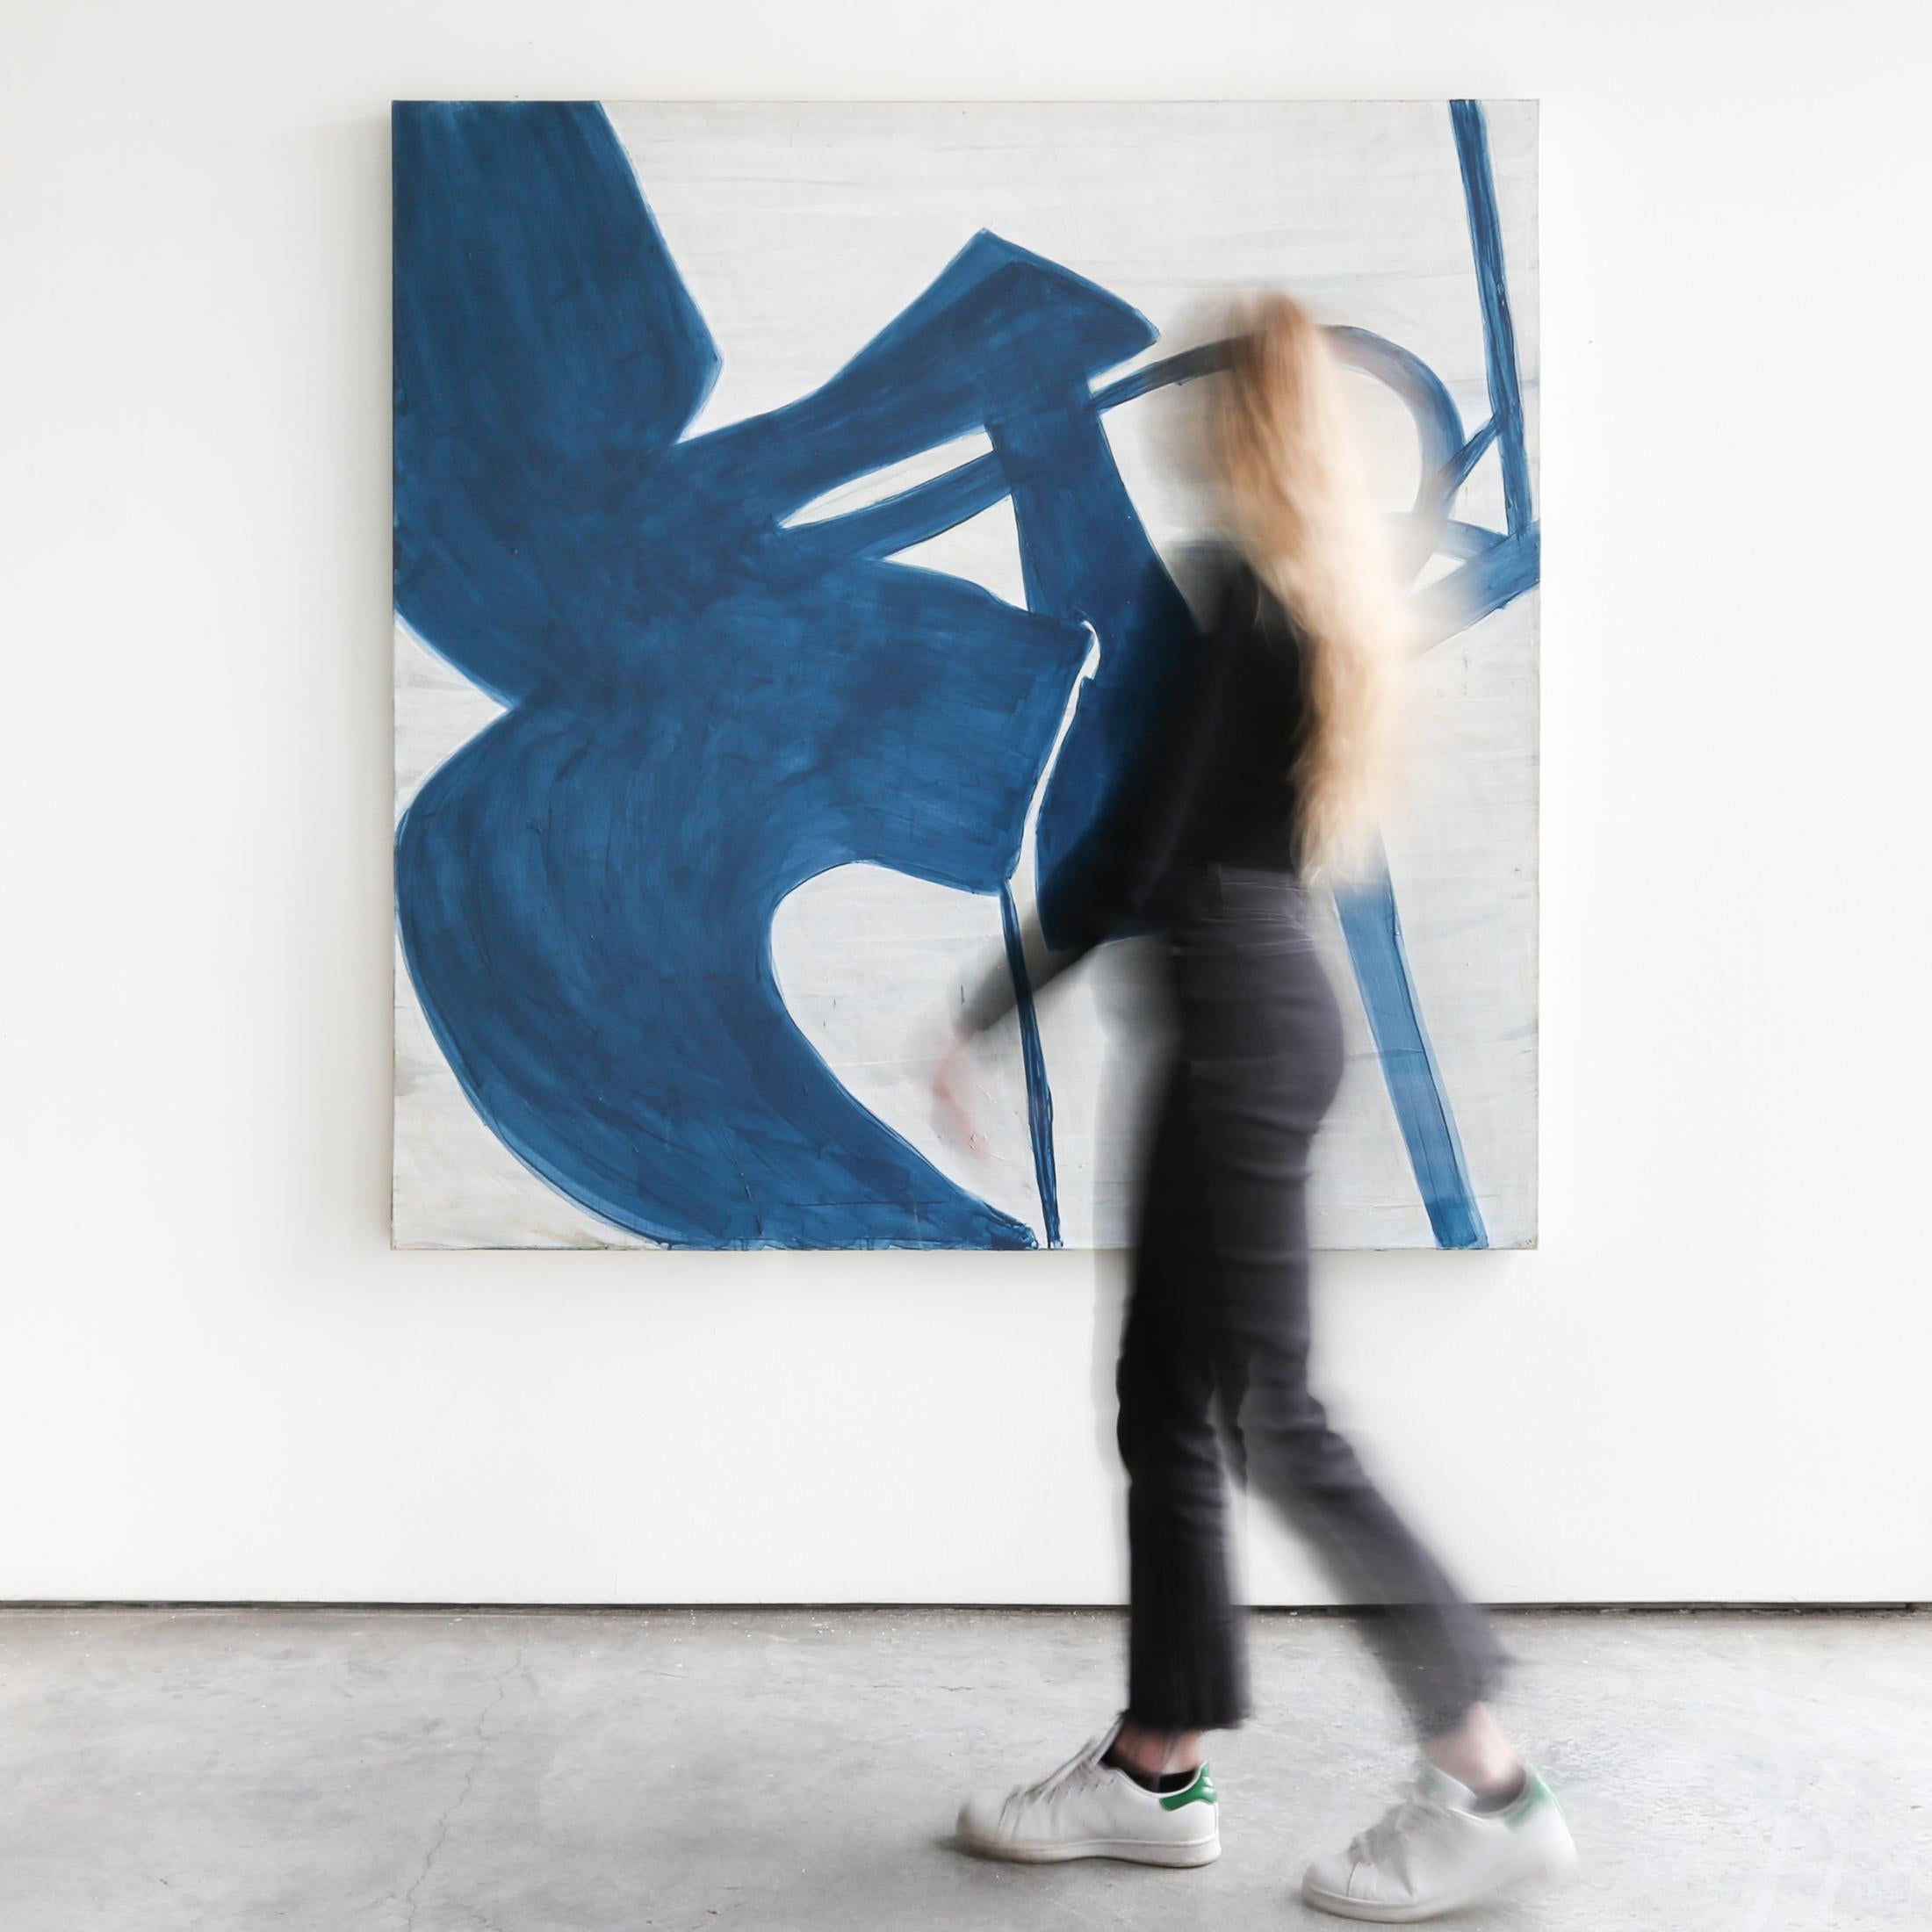 INDIGO COLLAGE I by artist Kim Fonder is a grey, indigo, blue, and white contemporary abstract mixed media on canvas painting that measures 60 x 60 and is priced at $6,200.

Kim Fonder loves texture and touch. Her paintings and furniture reflect her